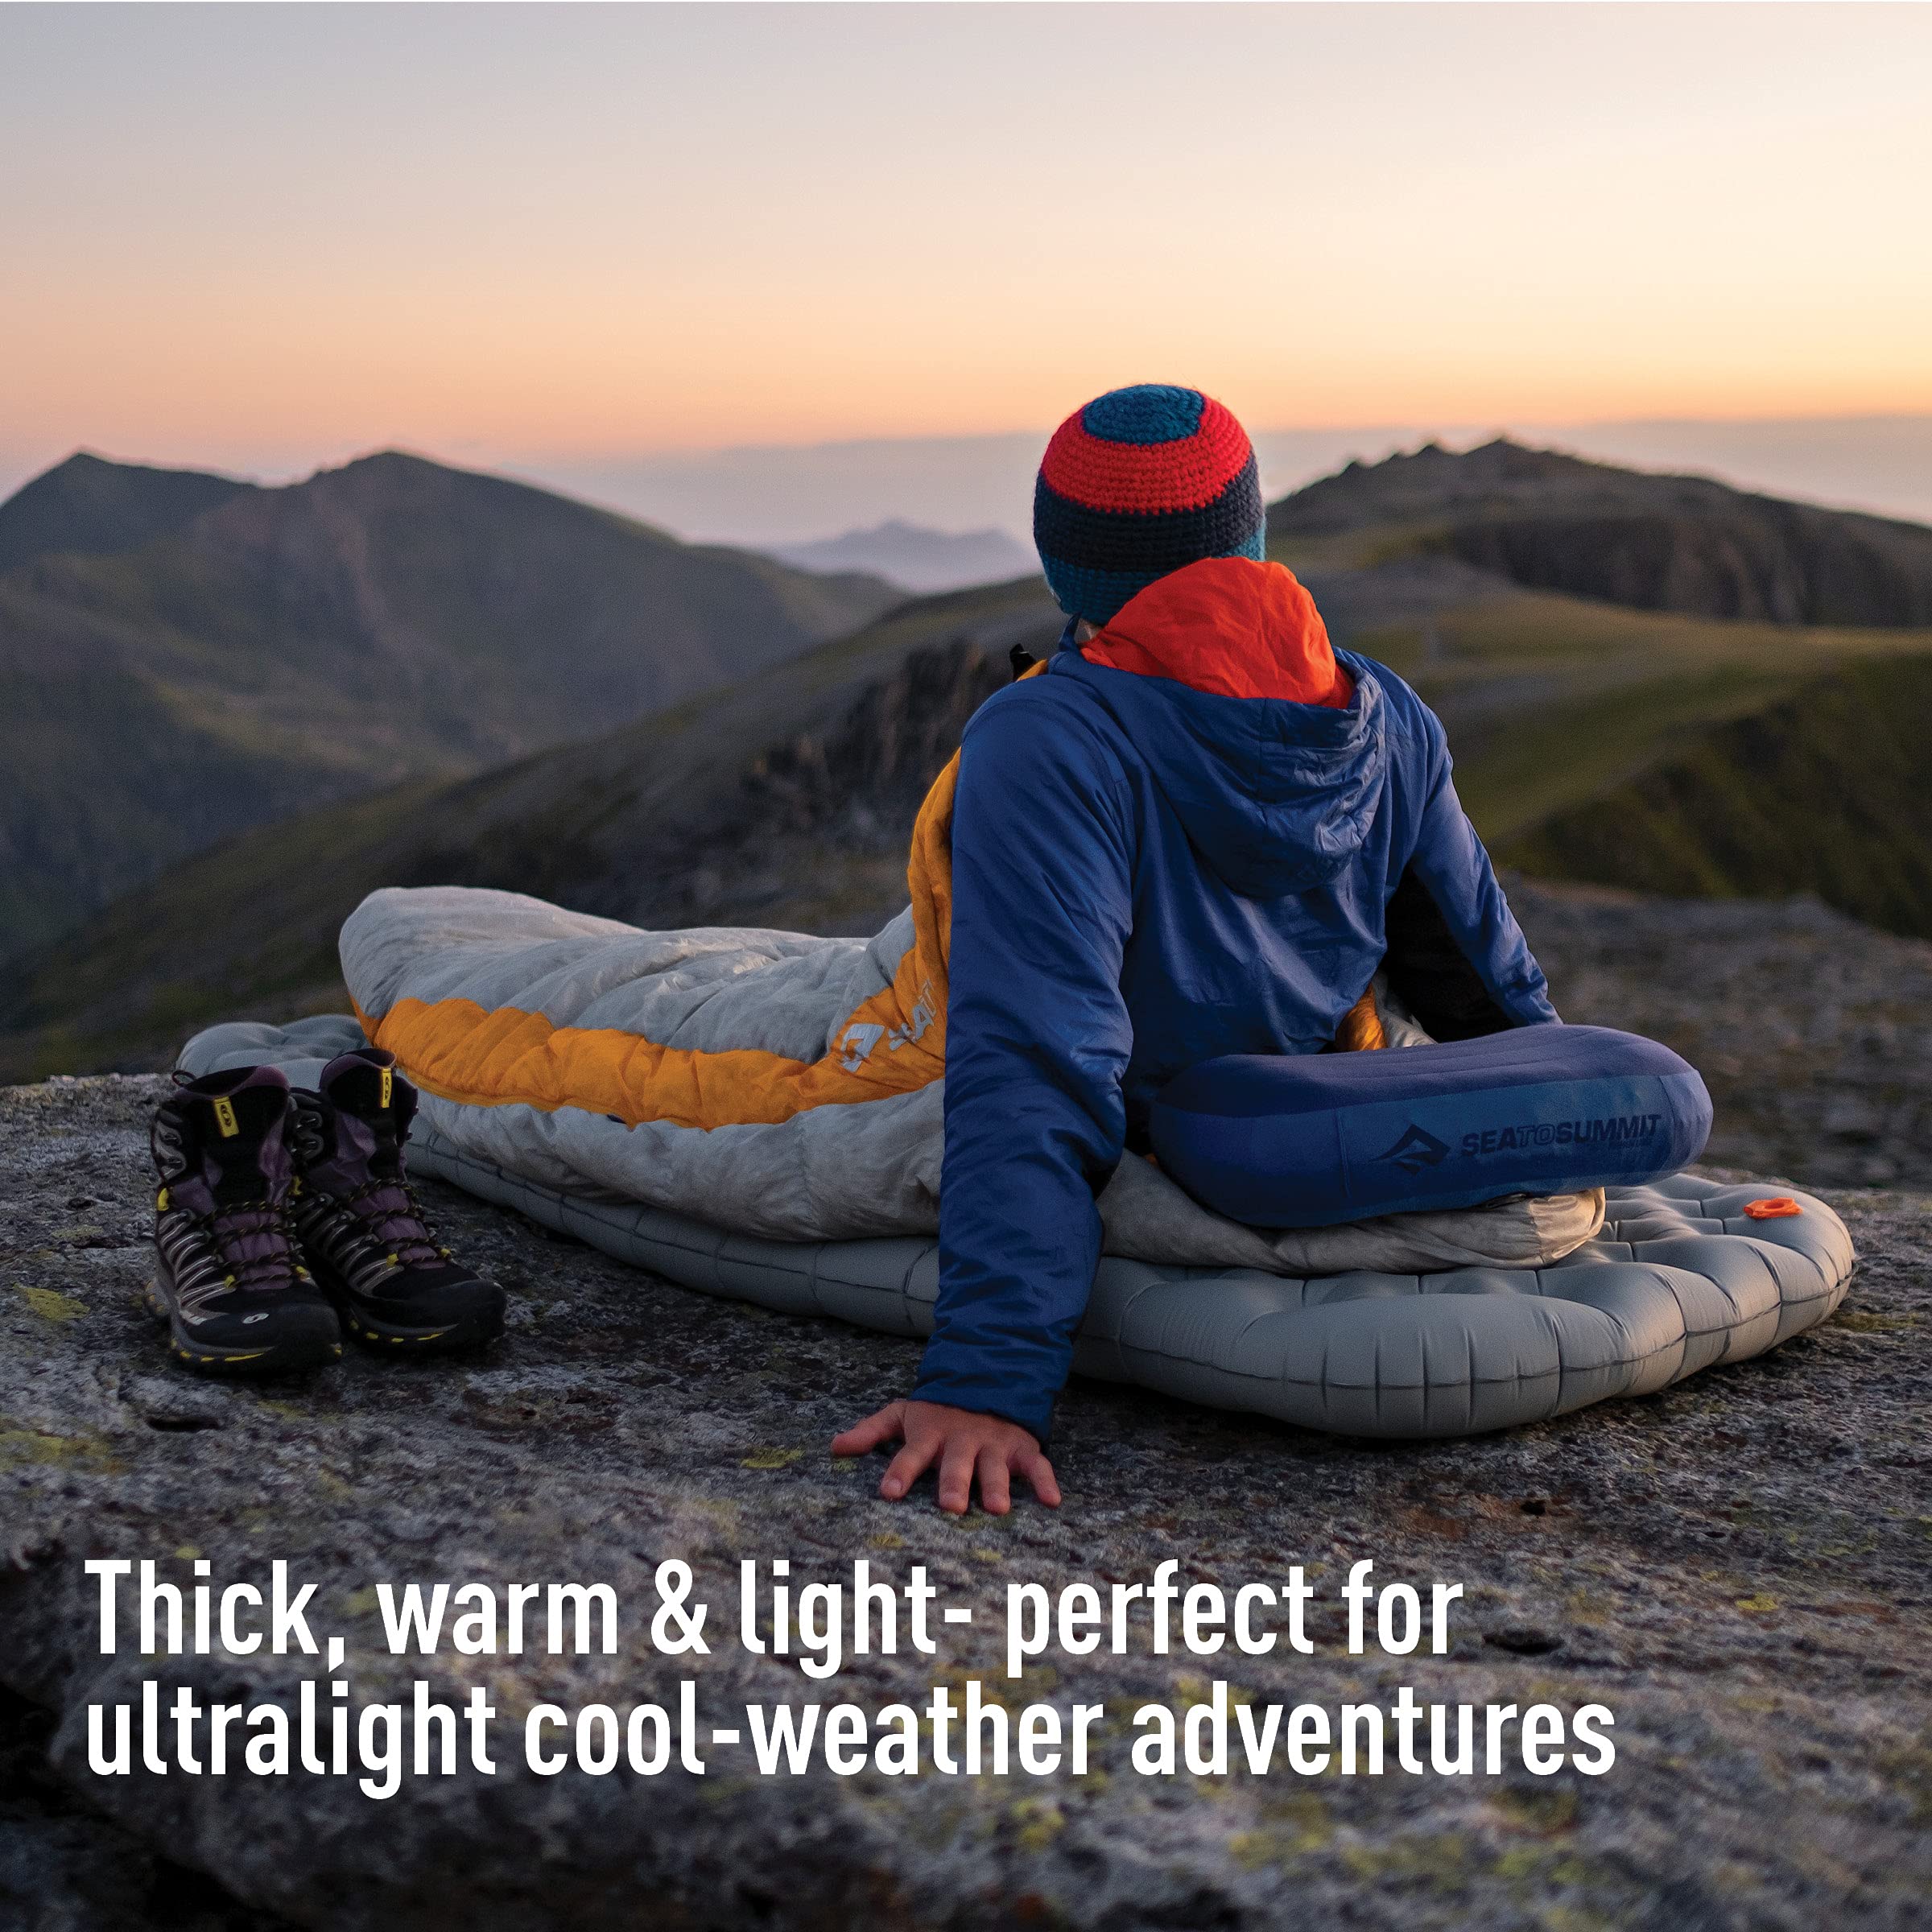 Sea to Summit Ether Light XT Extra-Thick Insulated Sleeping Pad, Rectangular - Regular (72 x 25 x 4 inches)